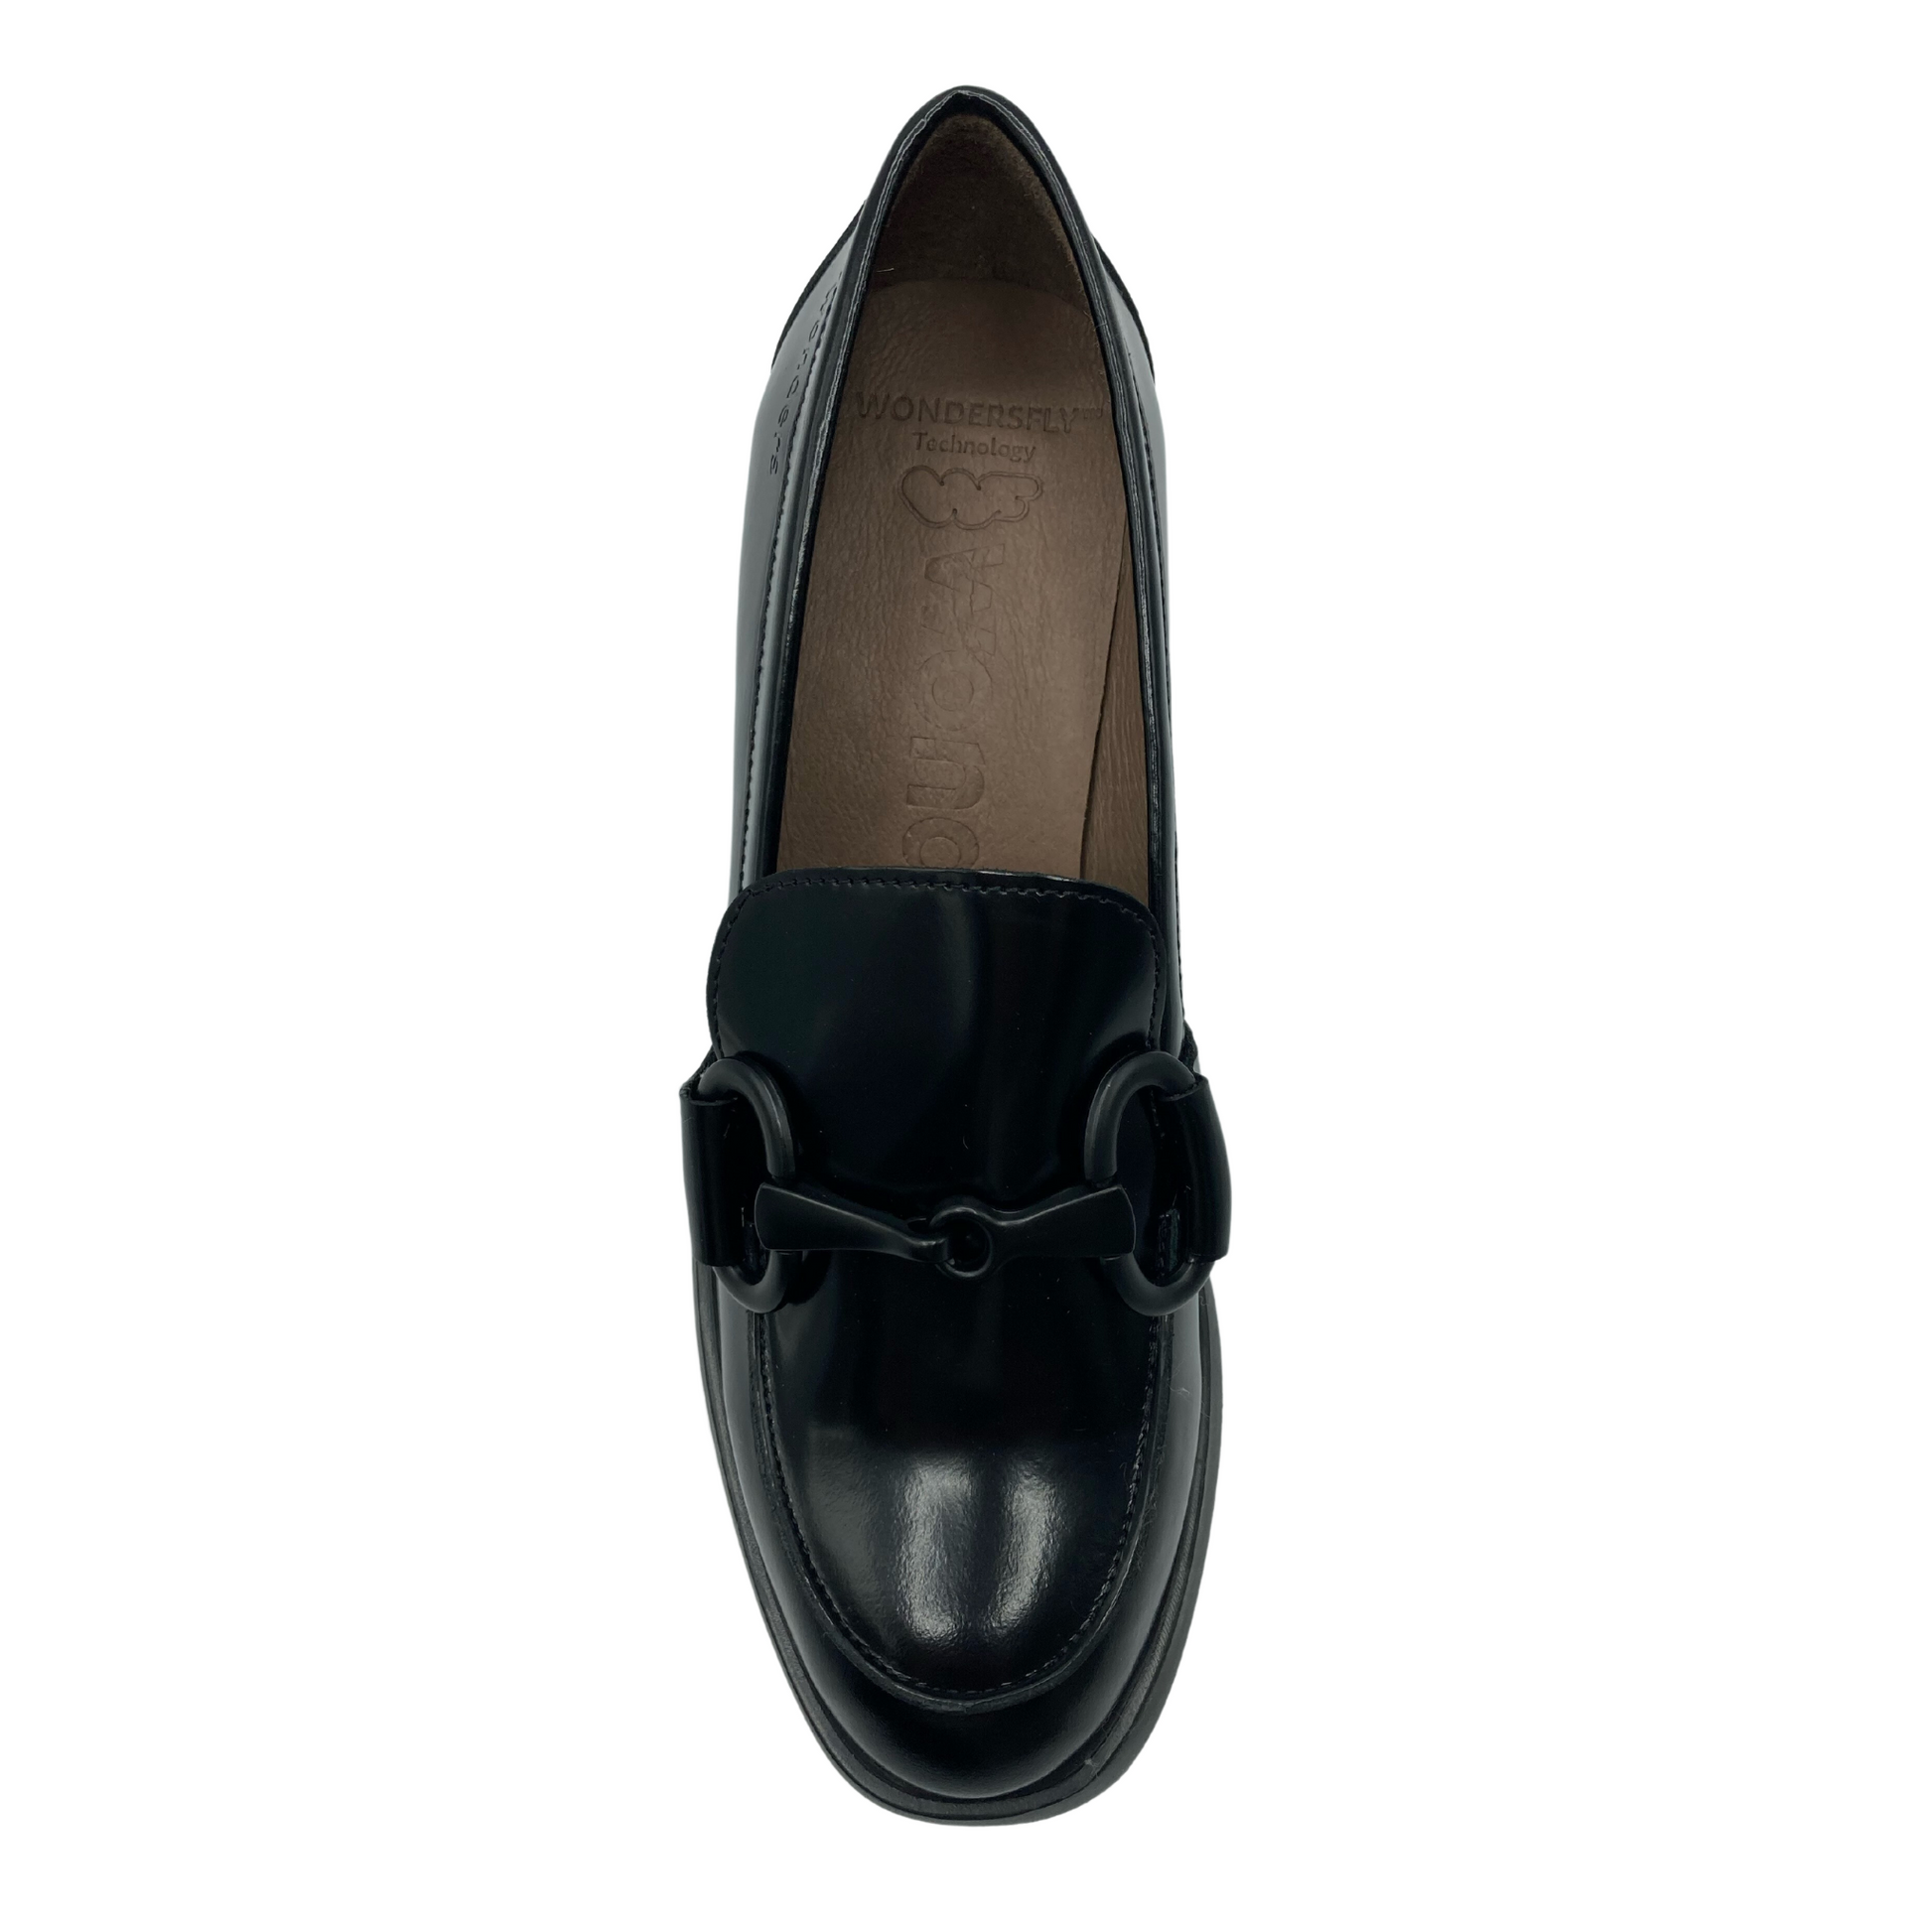 Top down view of black glossy loafer with taupe coloured lining